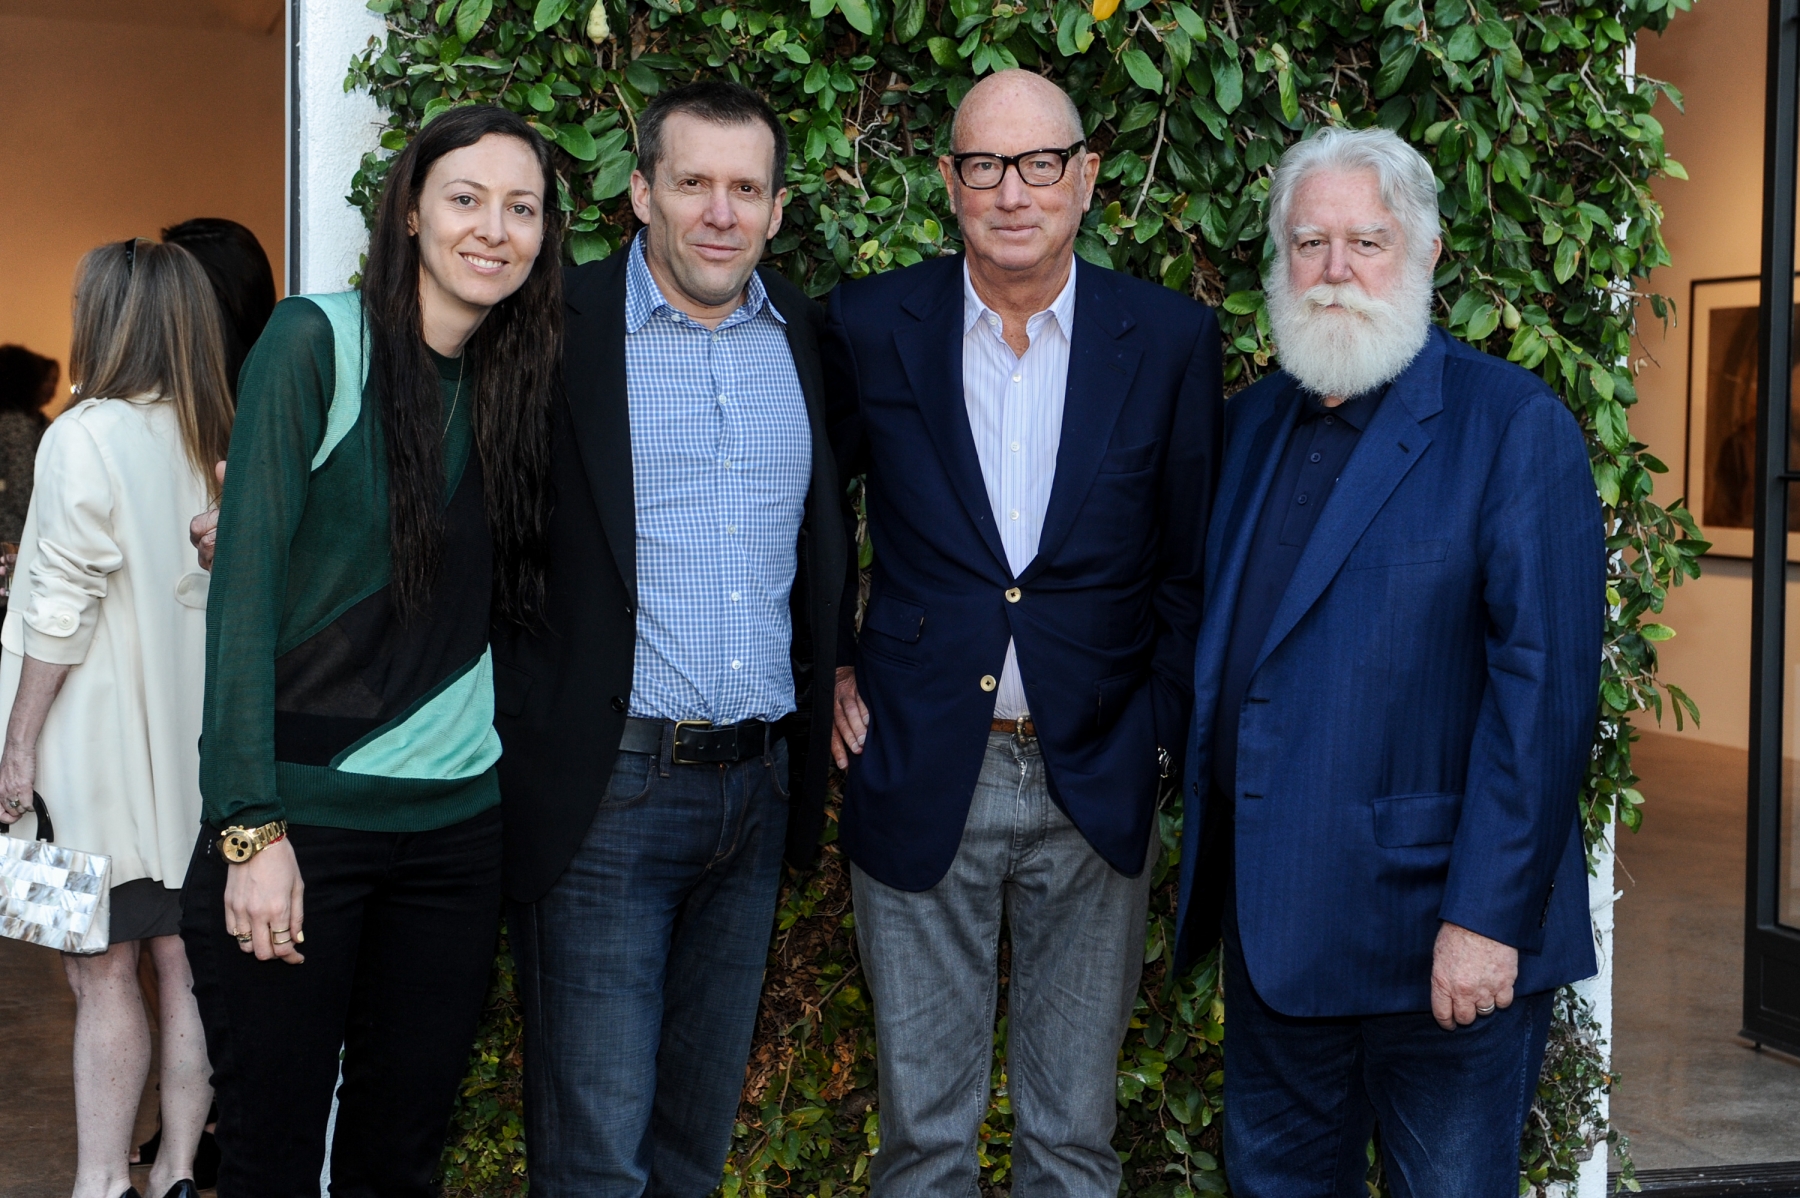 Maggie Kayne, Bill Griffin, James Corcoran, and James Turrell